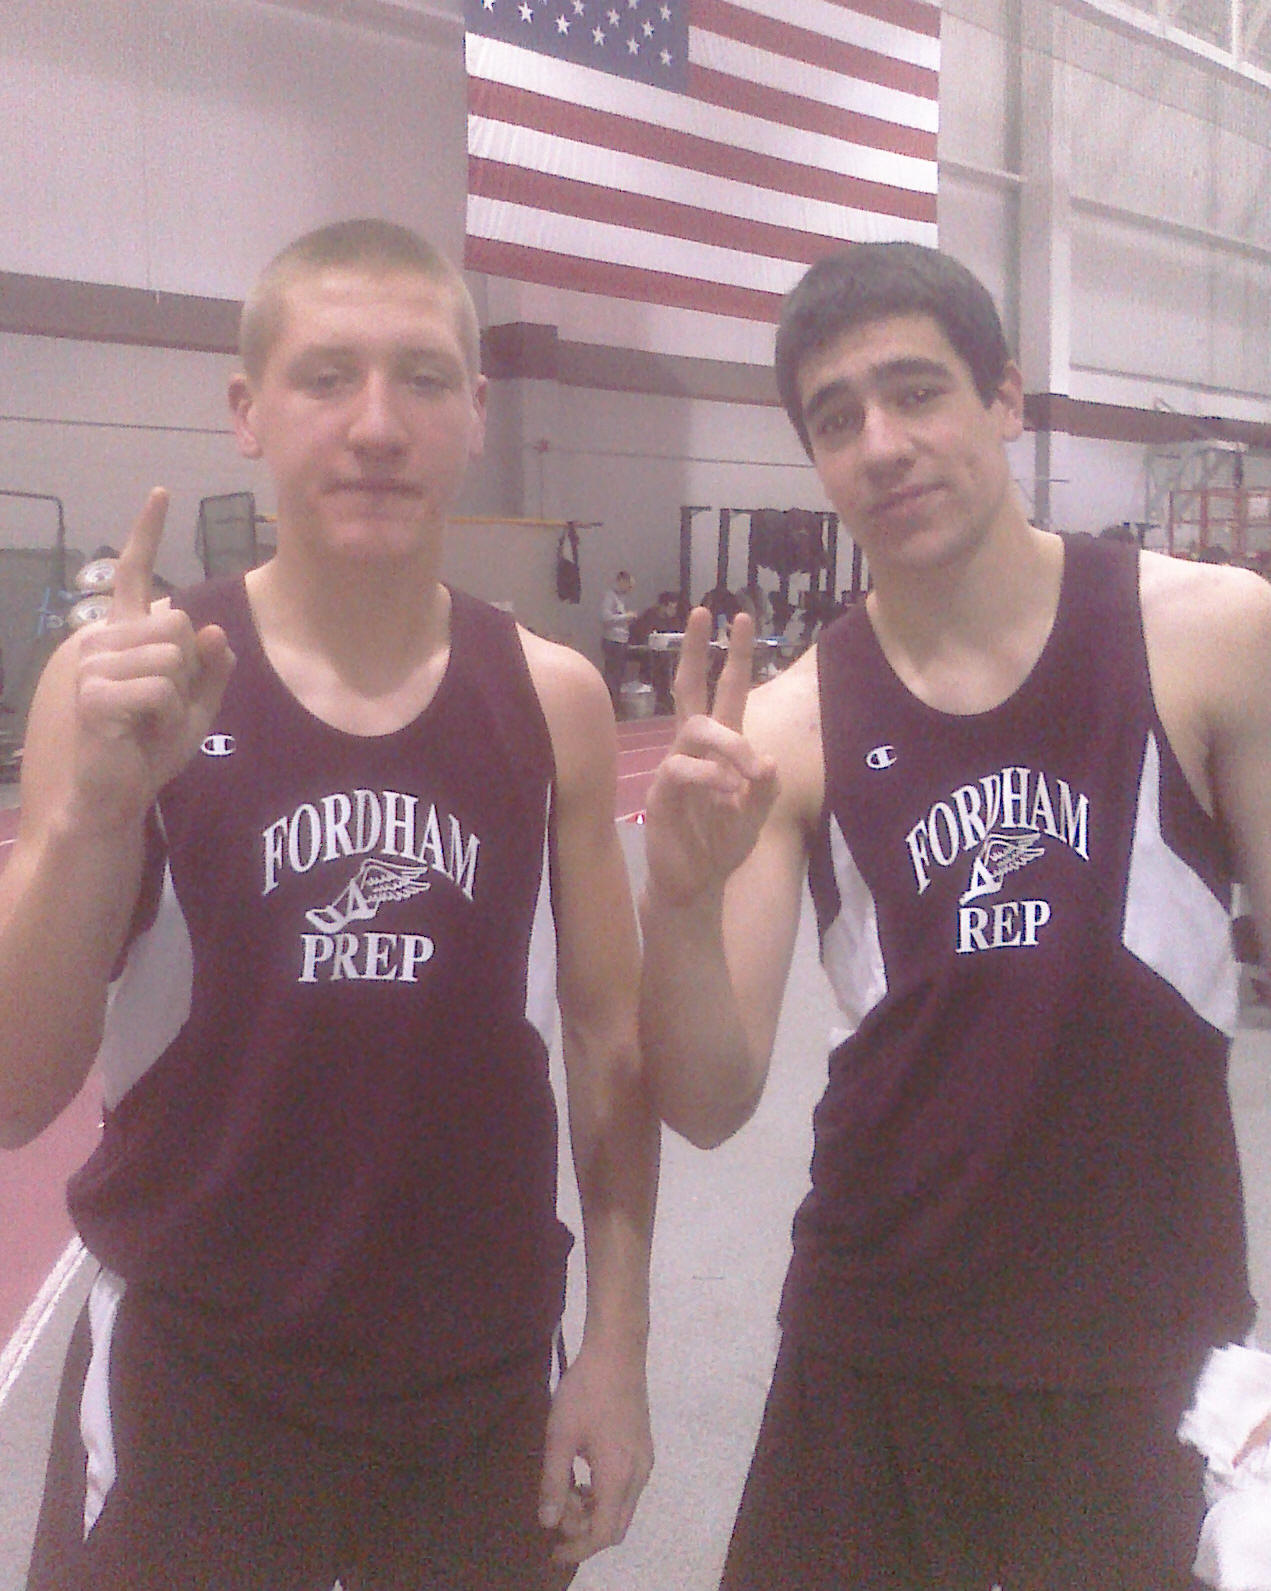 Sean McEvoy '13 & Lucas Gilbride '13 went 1-2 in the Pole Vault to help the Sophs to the Sectional Title Jan 8, 2011